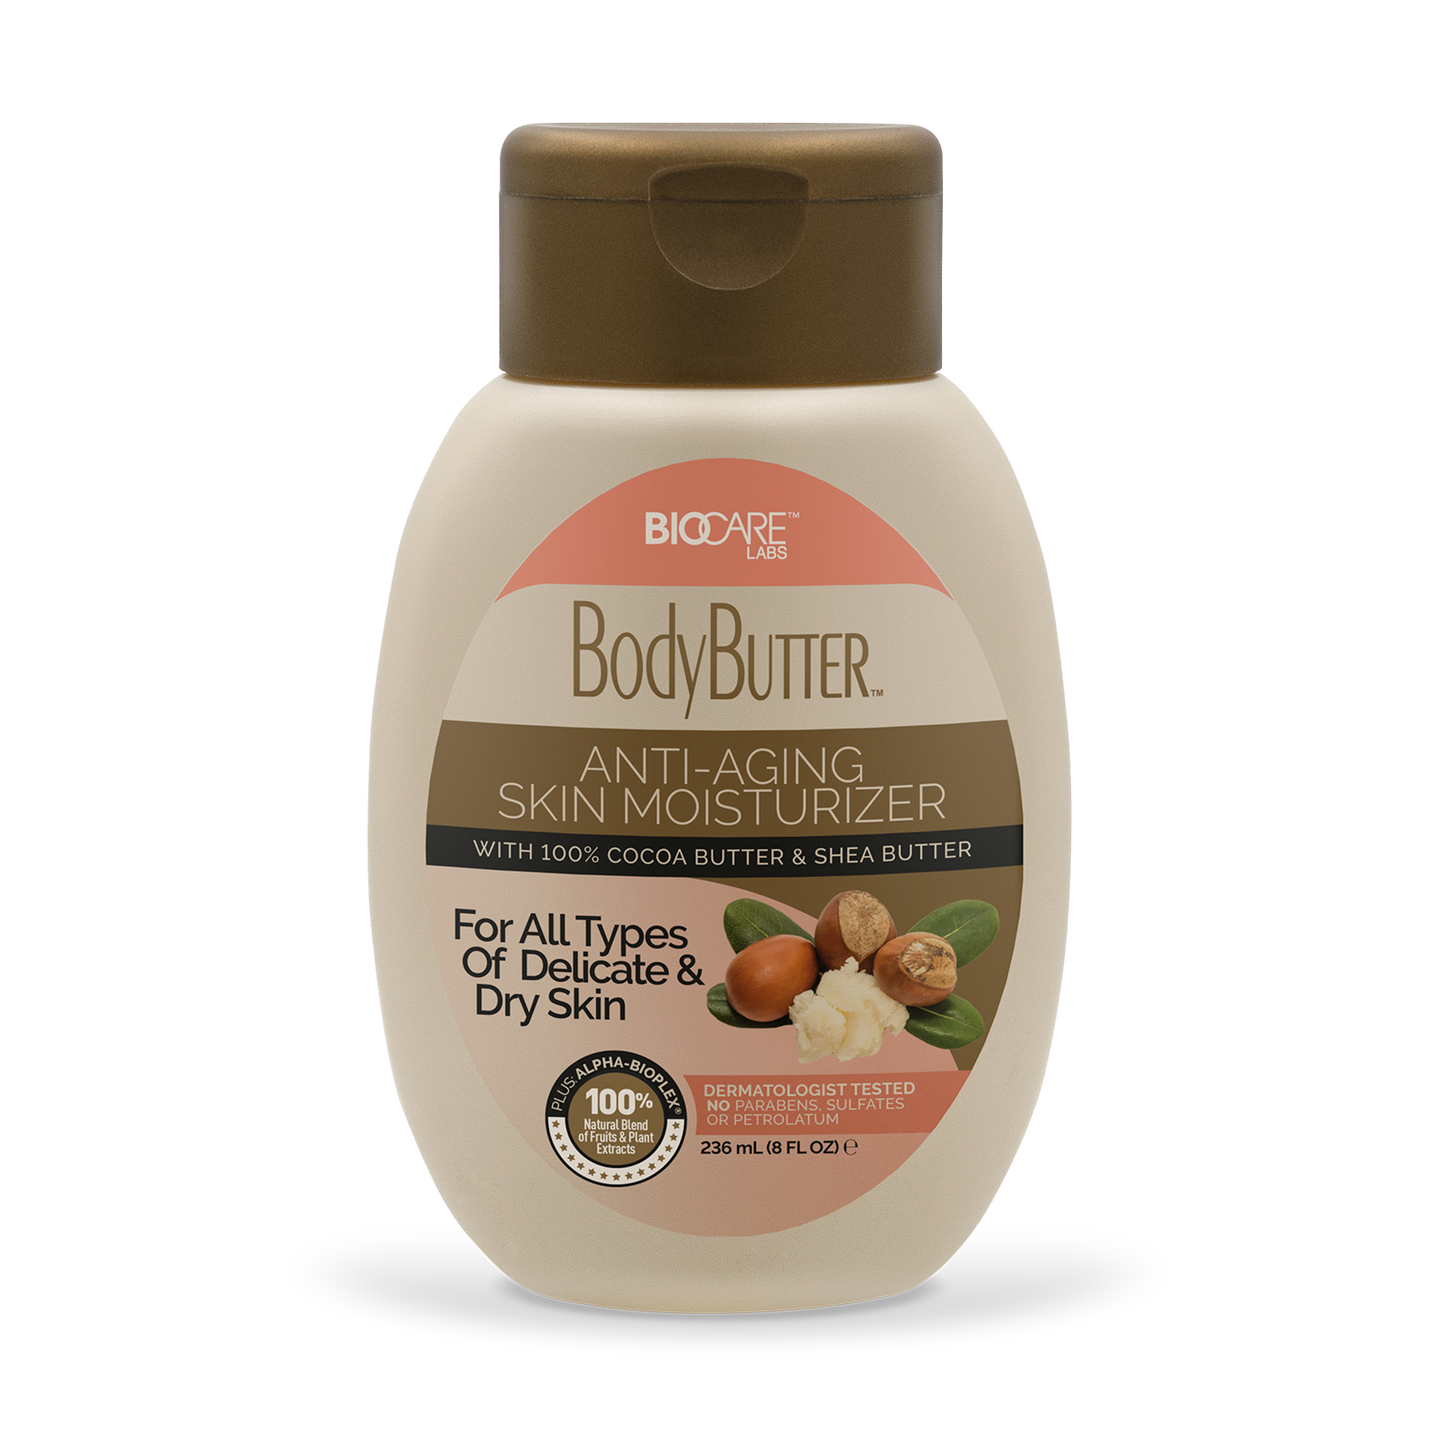 8 oz container of BodyButter With Cocoa Butter & Shea Butter